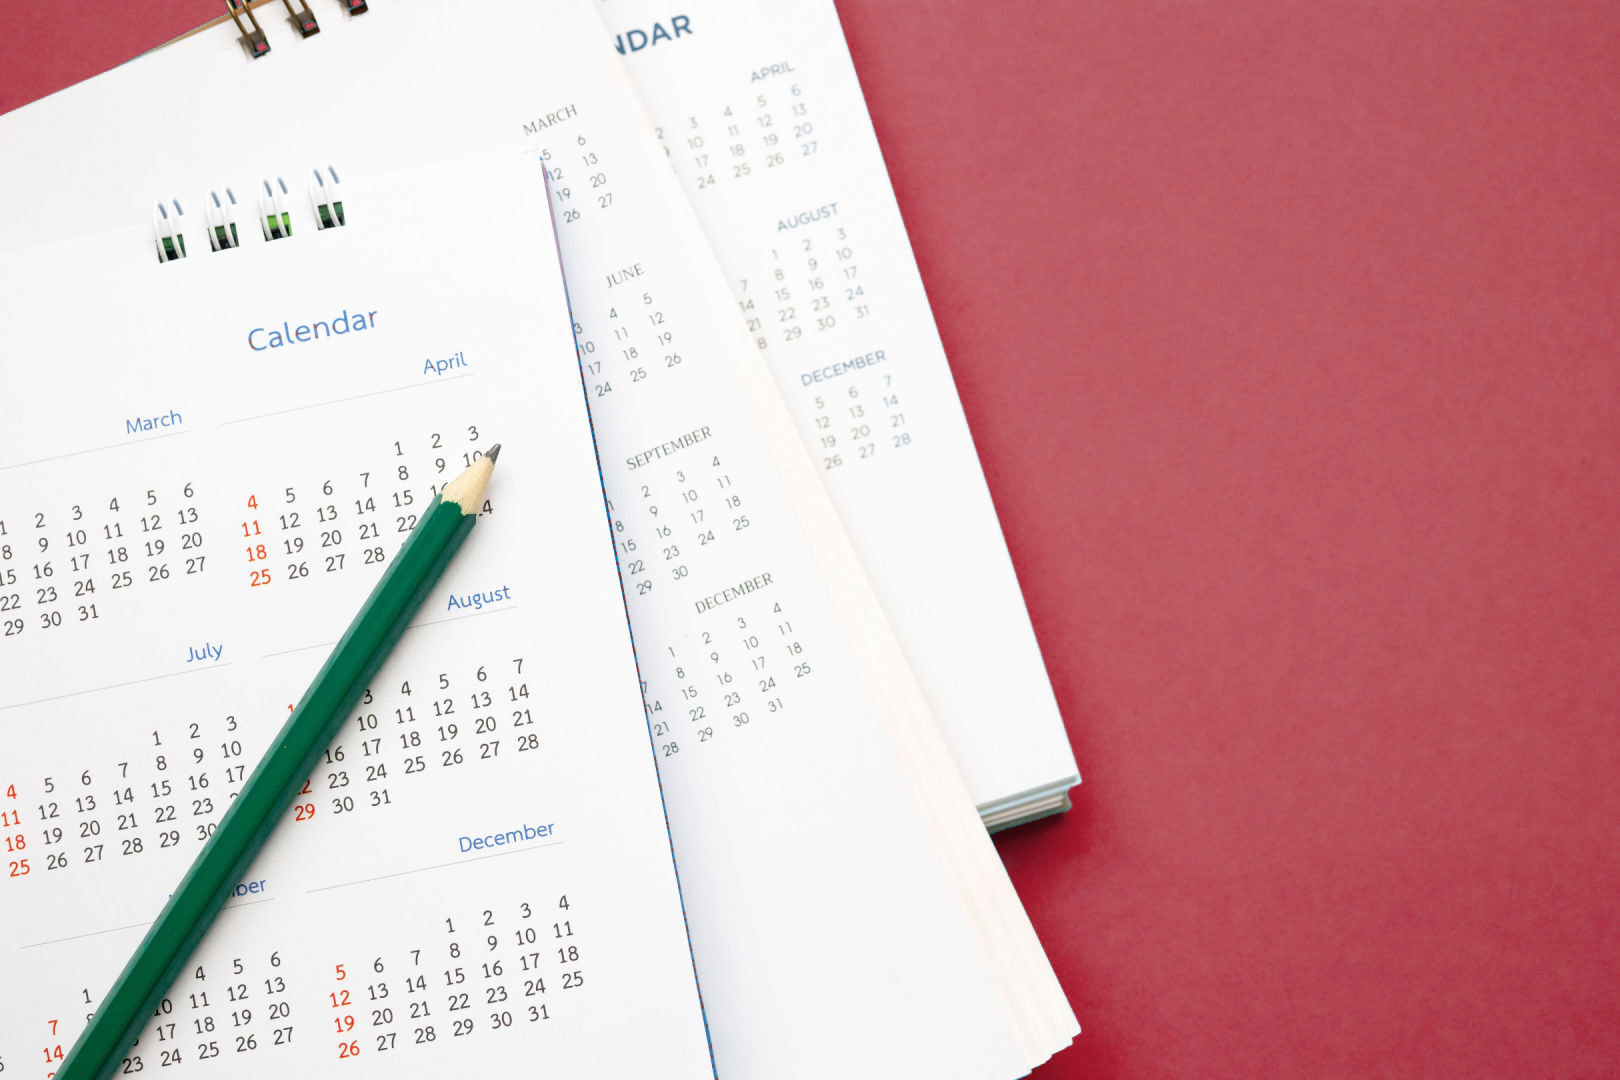 Calendar for EIS deferral relief and pencil (red background)